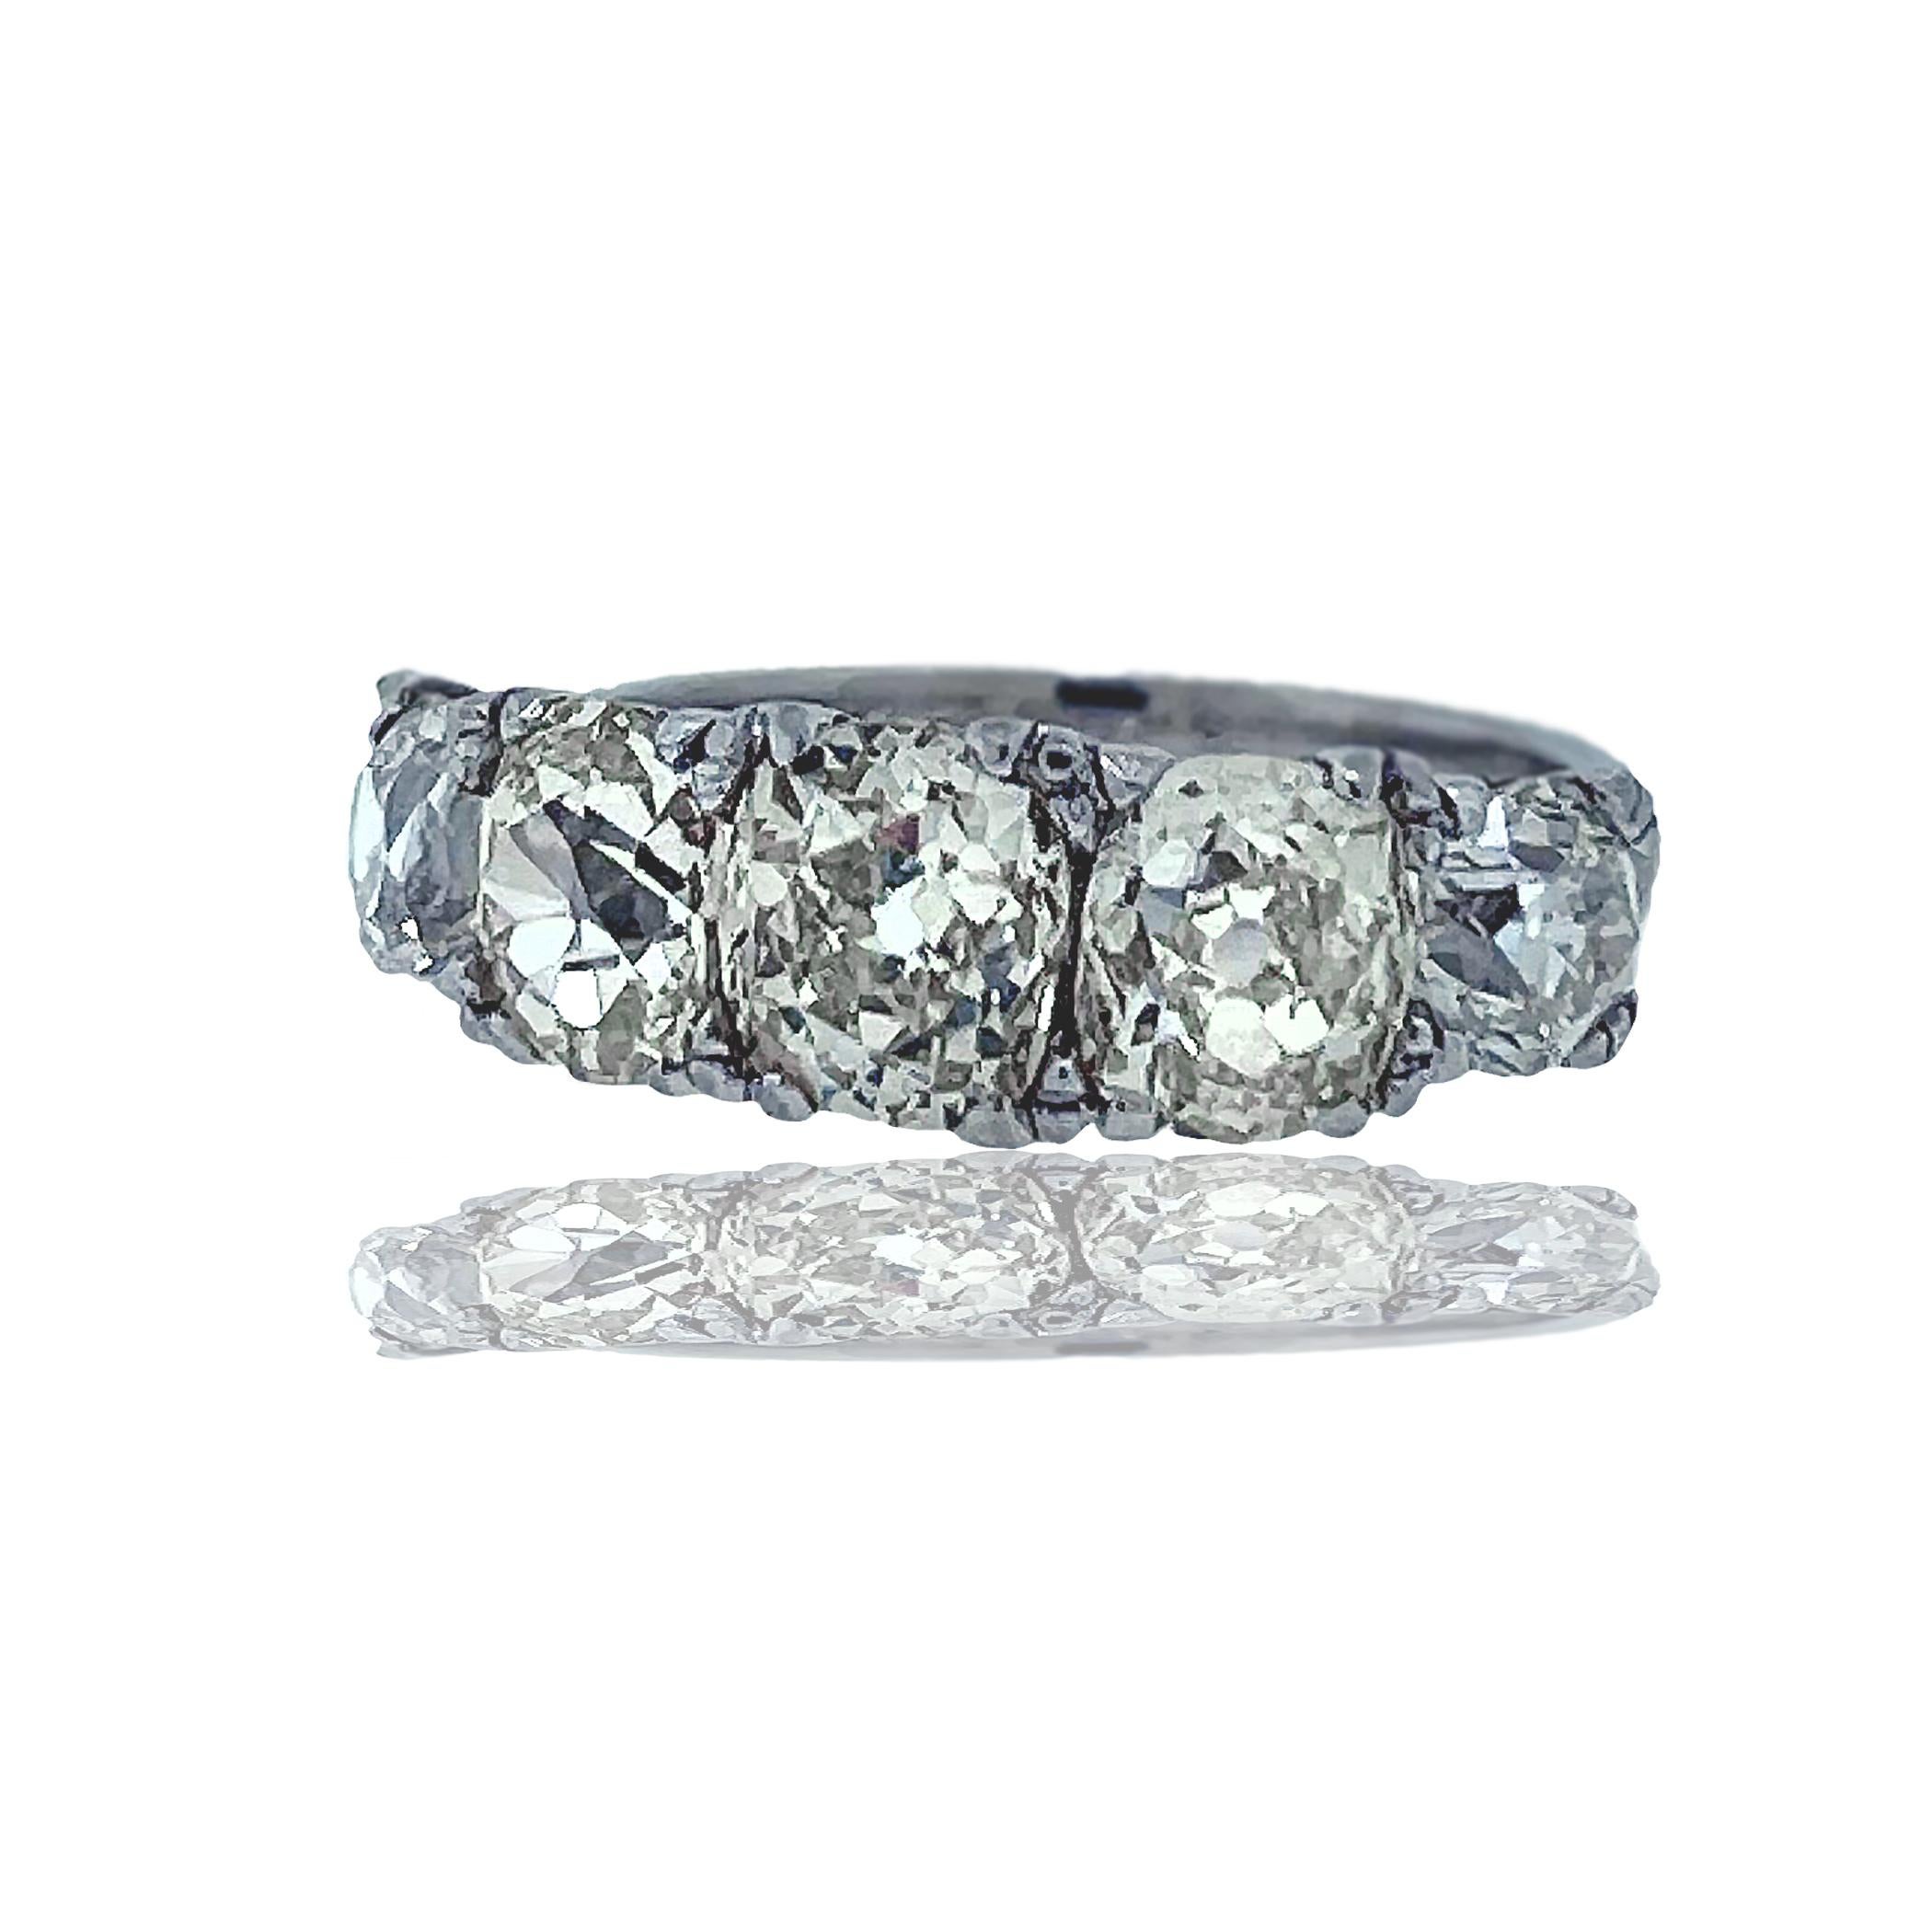 A beautiful 5-stone diamond mine cut platinum ring.  The diamond range in color, clarity, and size from the following; 6 x 5.15 mm, 5.75 x 4.85 mm, 5.75 x 4.9mm, 4.39 x 3.4 mm, 4.5 x 4.5 mm. The color and clarity range from M-N J-K and VS-SI.  This